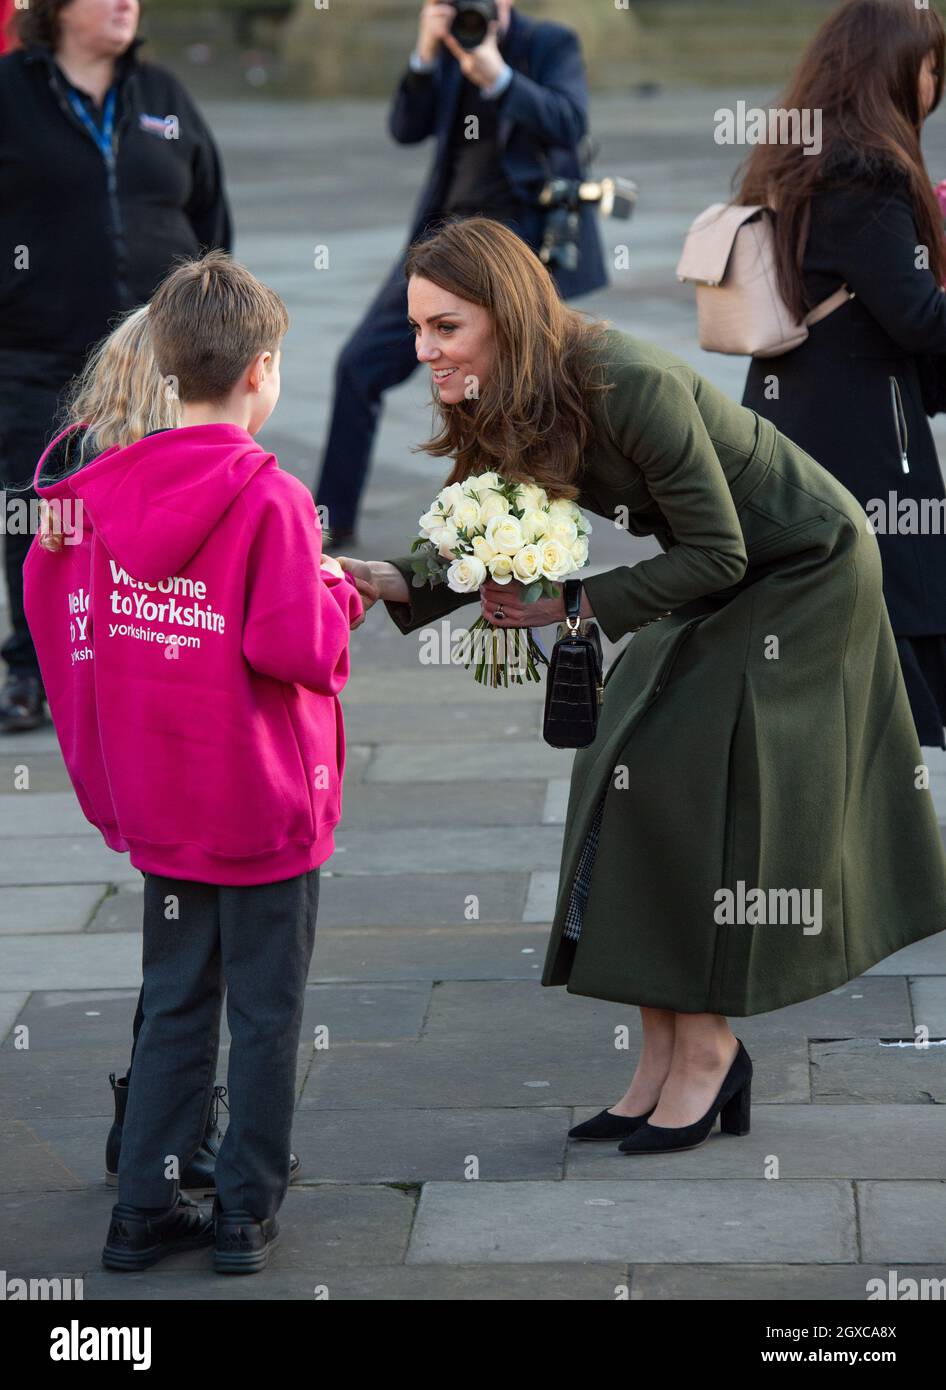 The Duchess of Cambridge wearing khaki coat by Alexander McQueen, receives white roses during a visit to Bradford, Yorkshire on January 15, 2020. Stock Photo